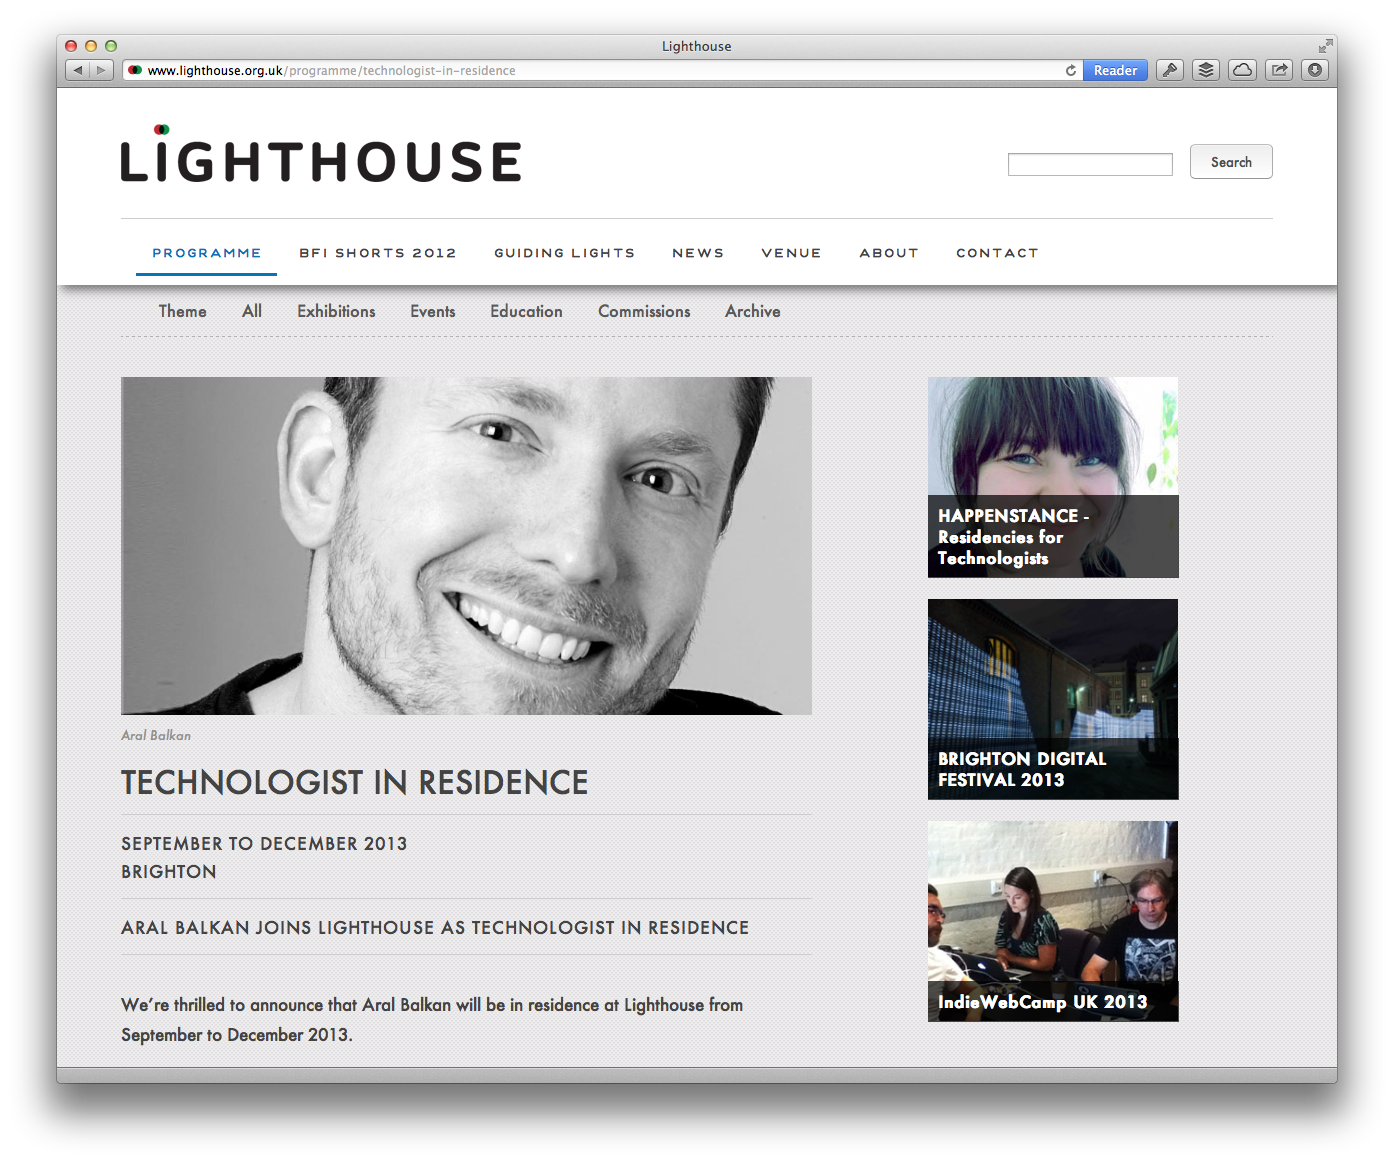 Screenshot my Technologist in Residence page at Lighthouse.